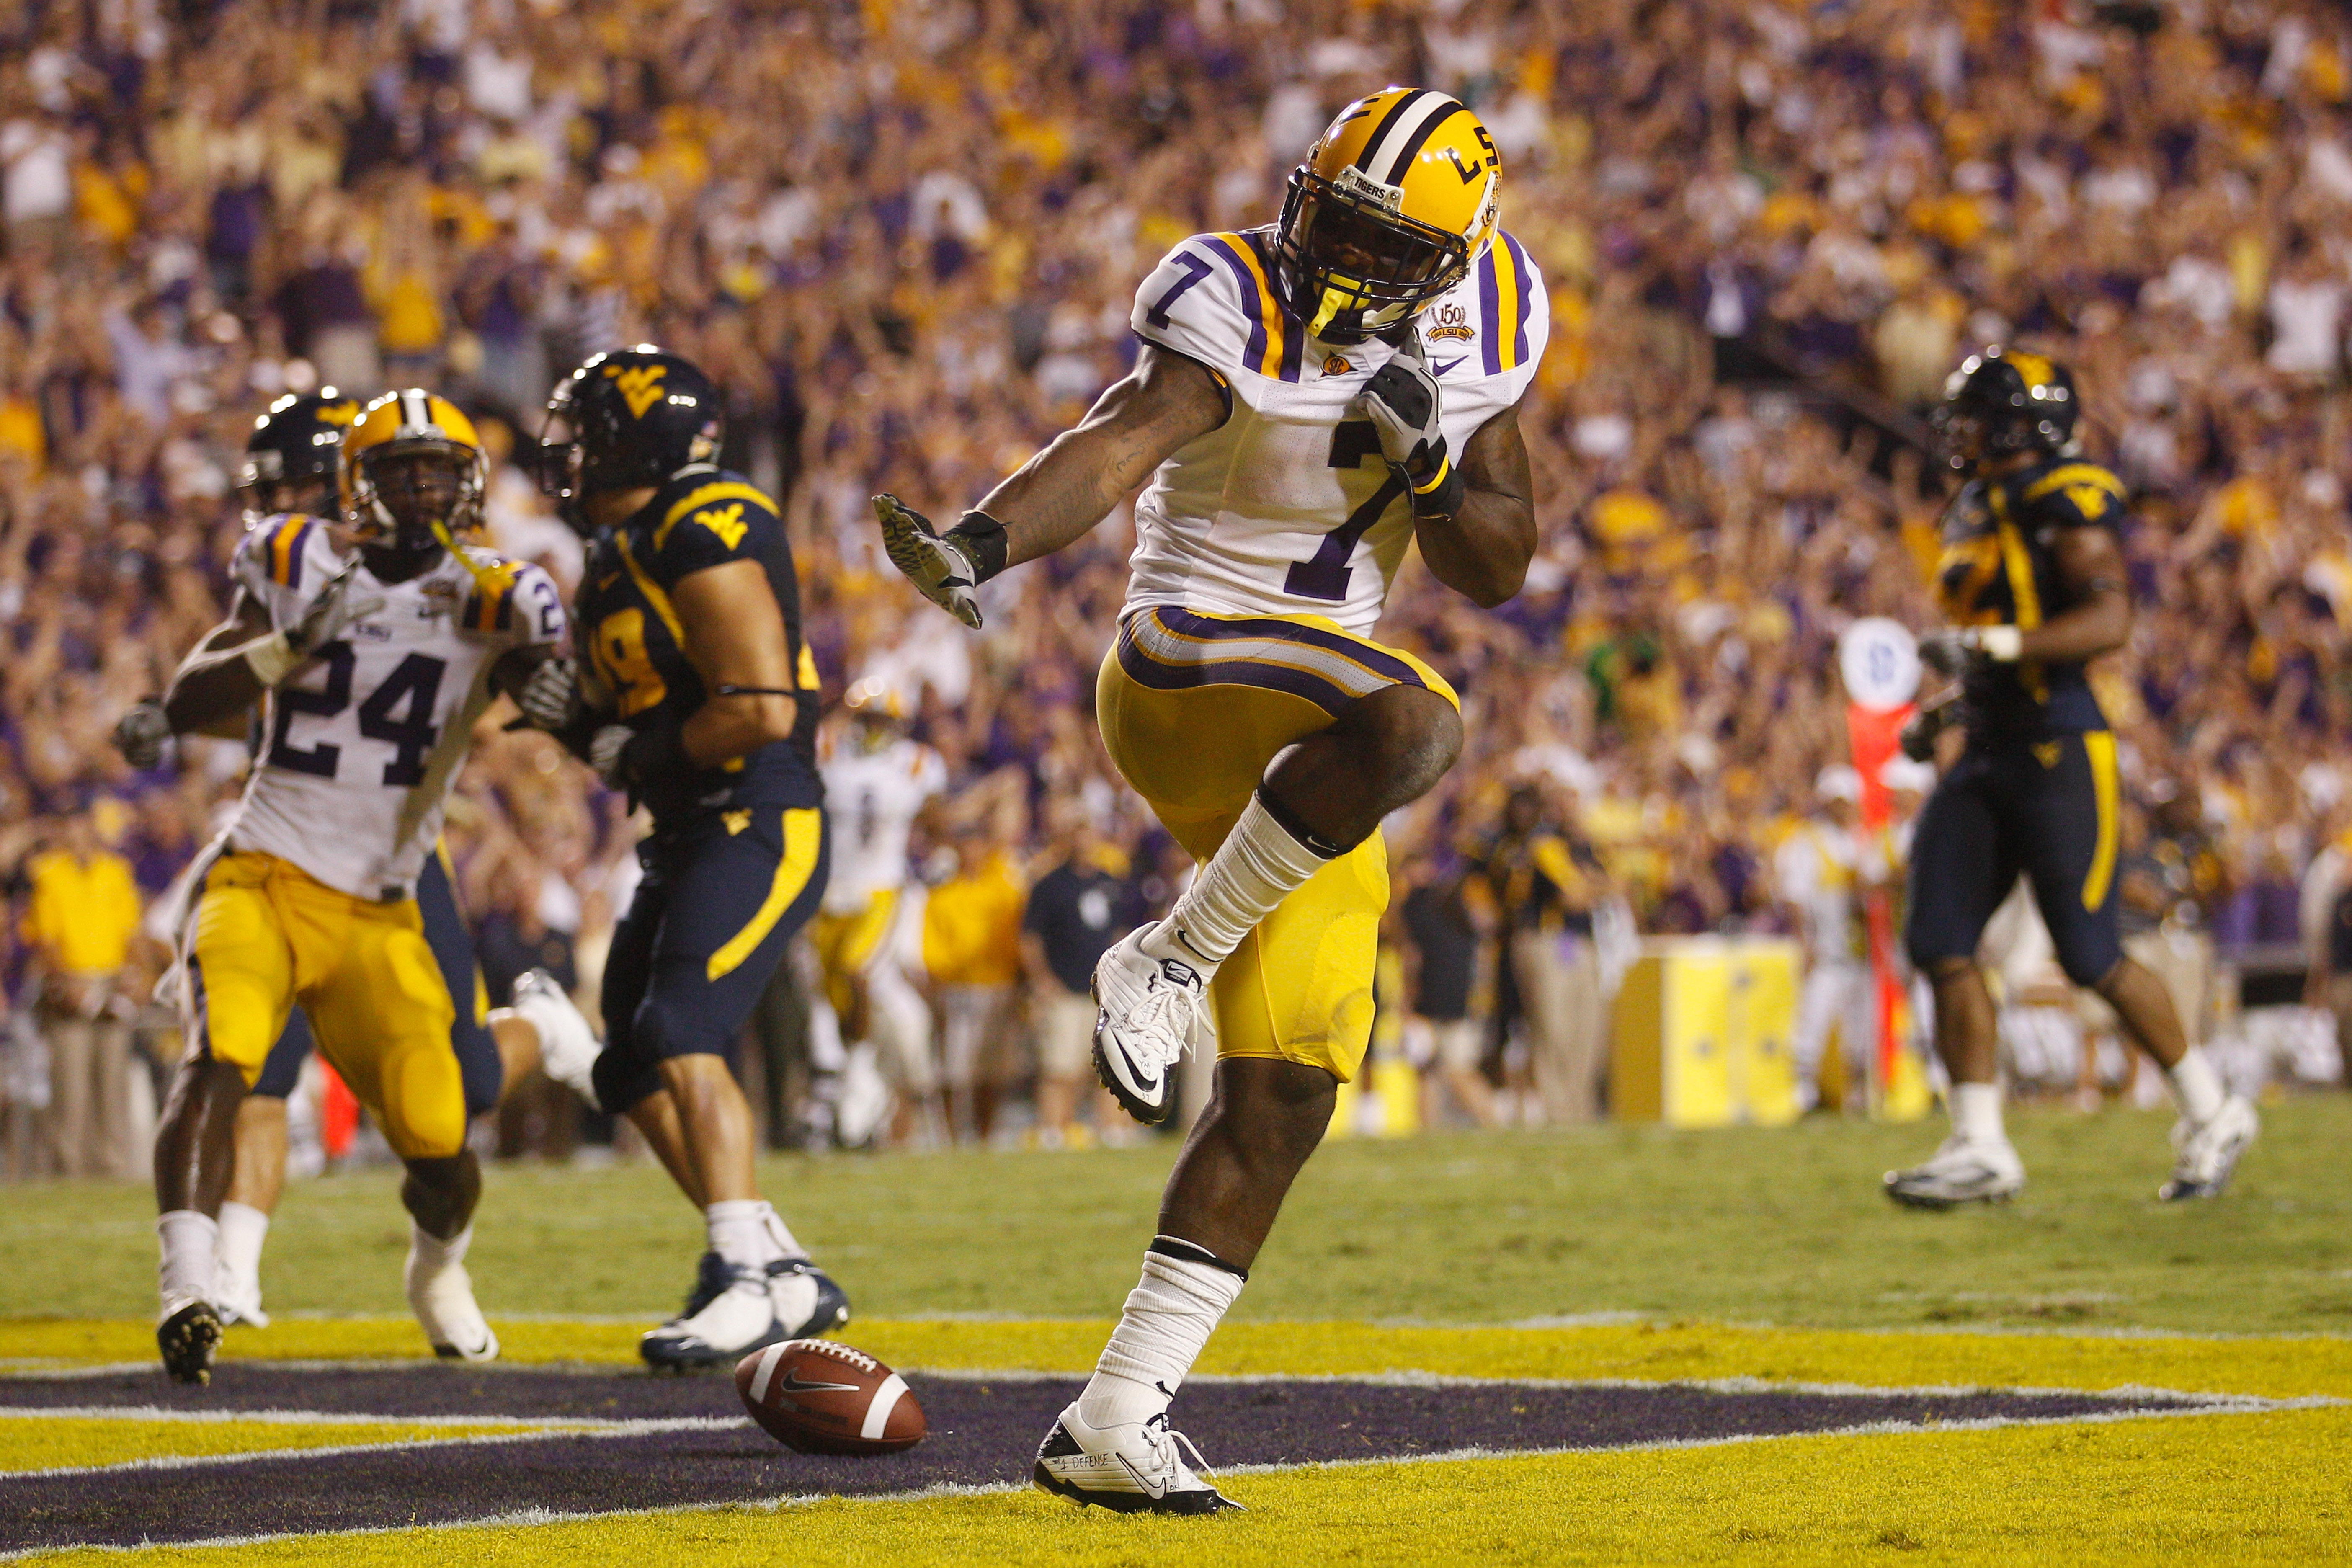 BATON ROUGE, LA - SEPTEMBER 25:  Patrick Peterson #7 of the Louisiana State Univeristy Tigers celebrates after scoring a touchdown by posing as the Heisman Trophy against the West Virginia Mountaineers at Tiger Stadium on September 25, 2010 in Baton Rouge